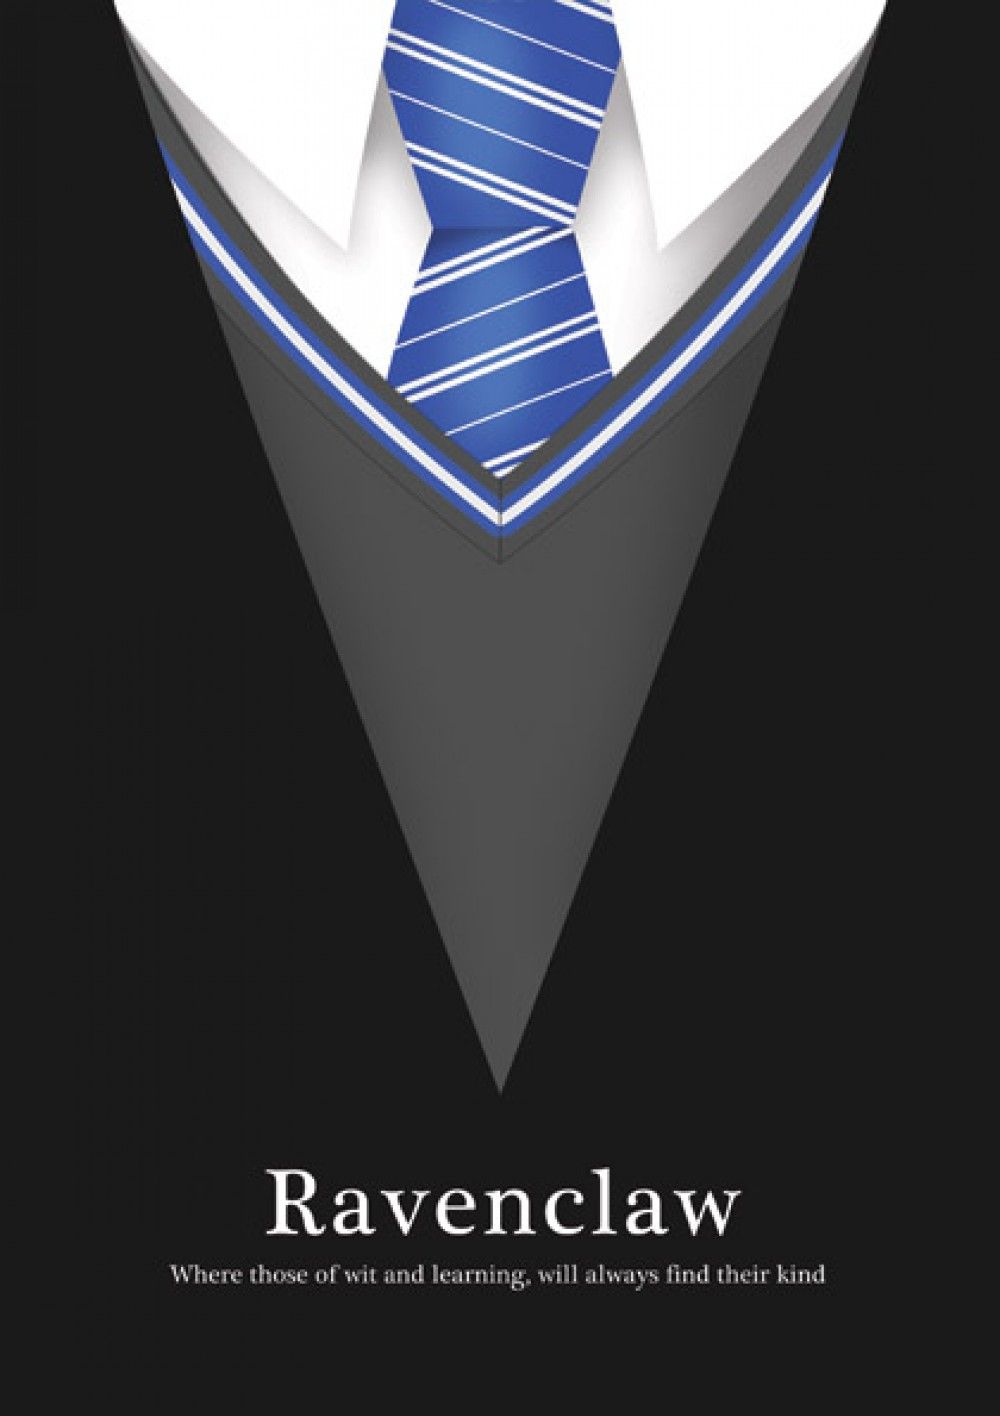 Ravenclaw Wallpaper - Google Search - Harry Potter Wallpaper Ravenclaw , HD Wallpaper & Backgrounds